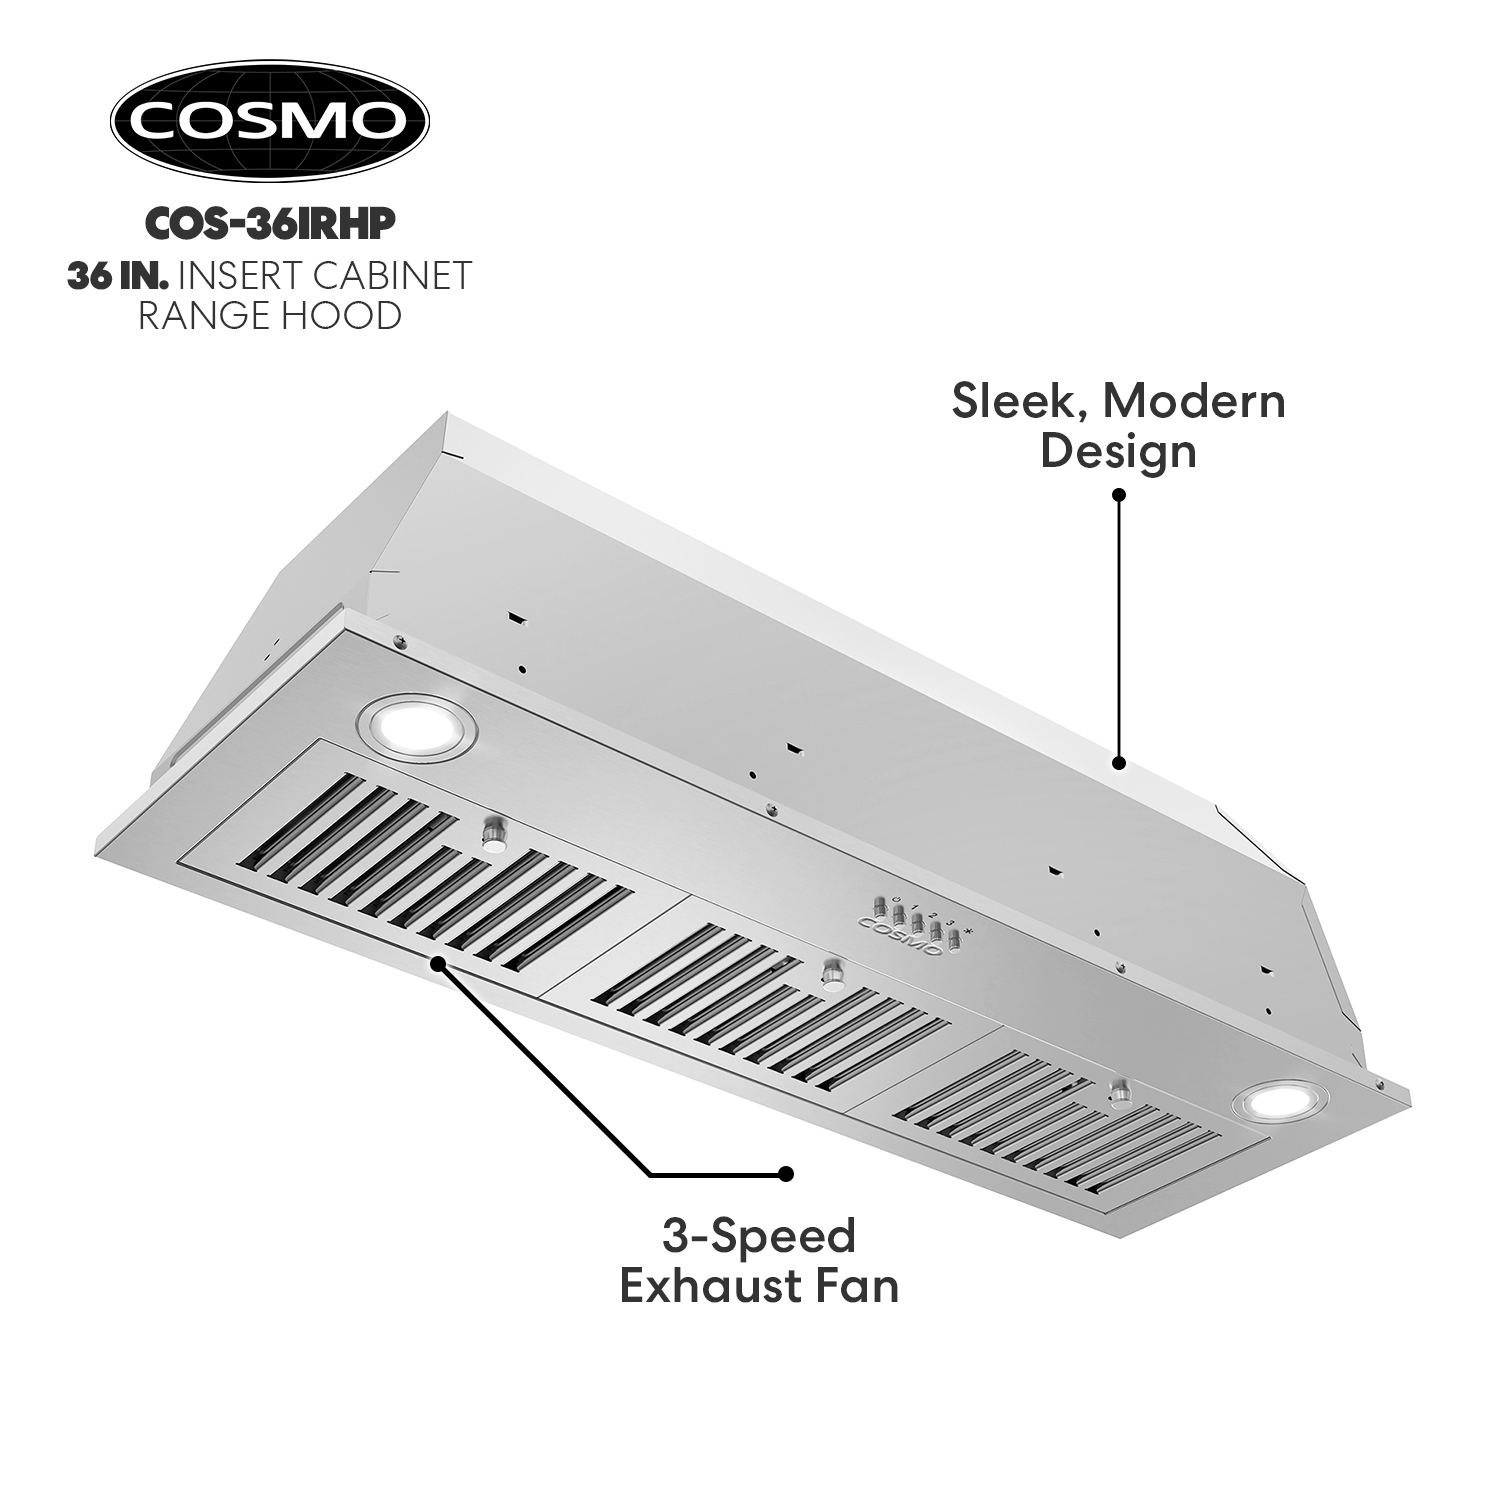 Cosmo 36 in. Insert Range Hood with Push Button Controls, 3-Speed Fan, LED Lights and Permanent Filters in Stainless Steel